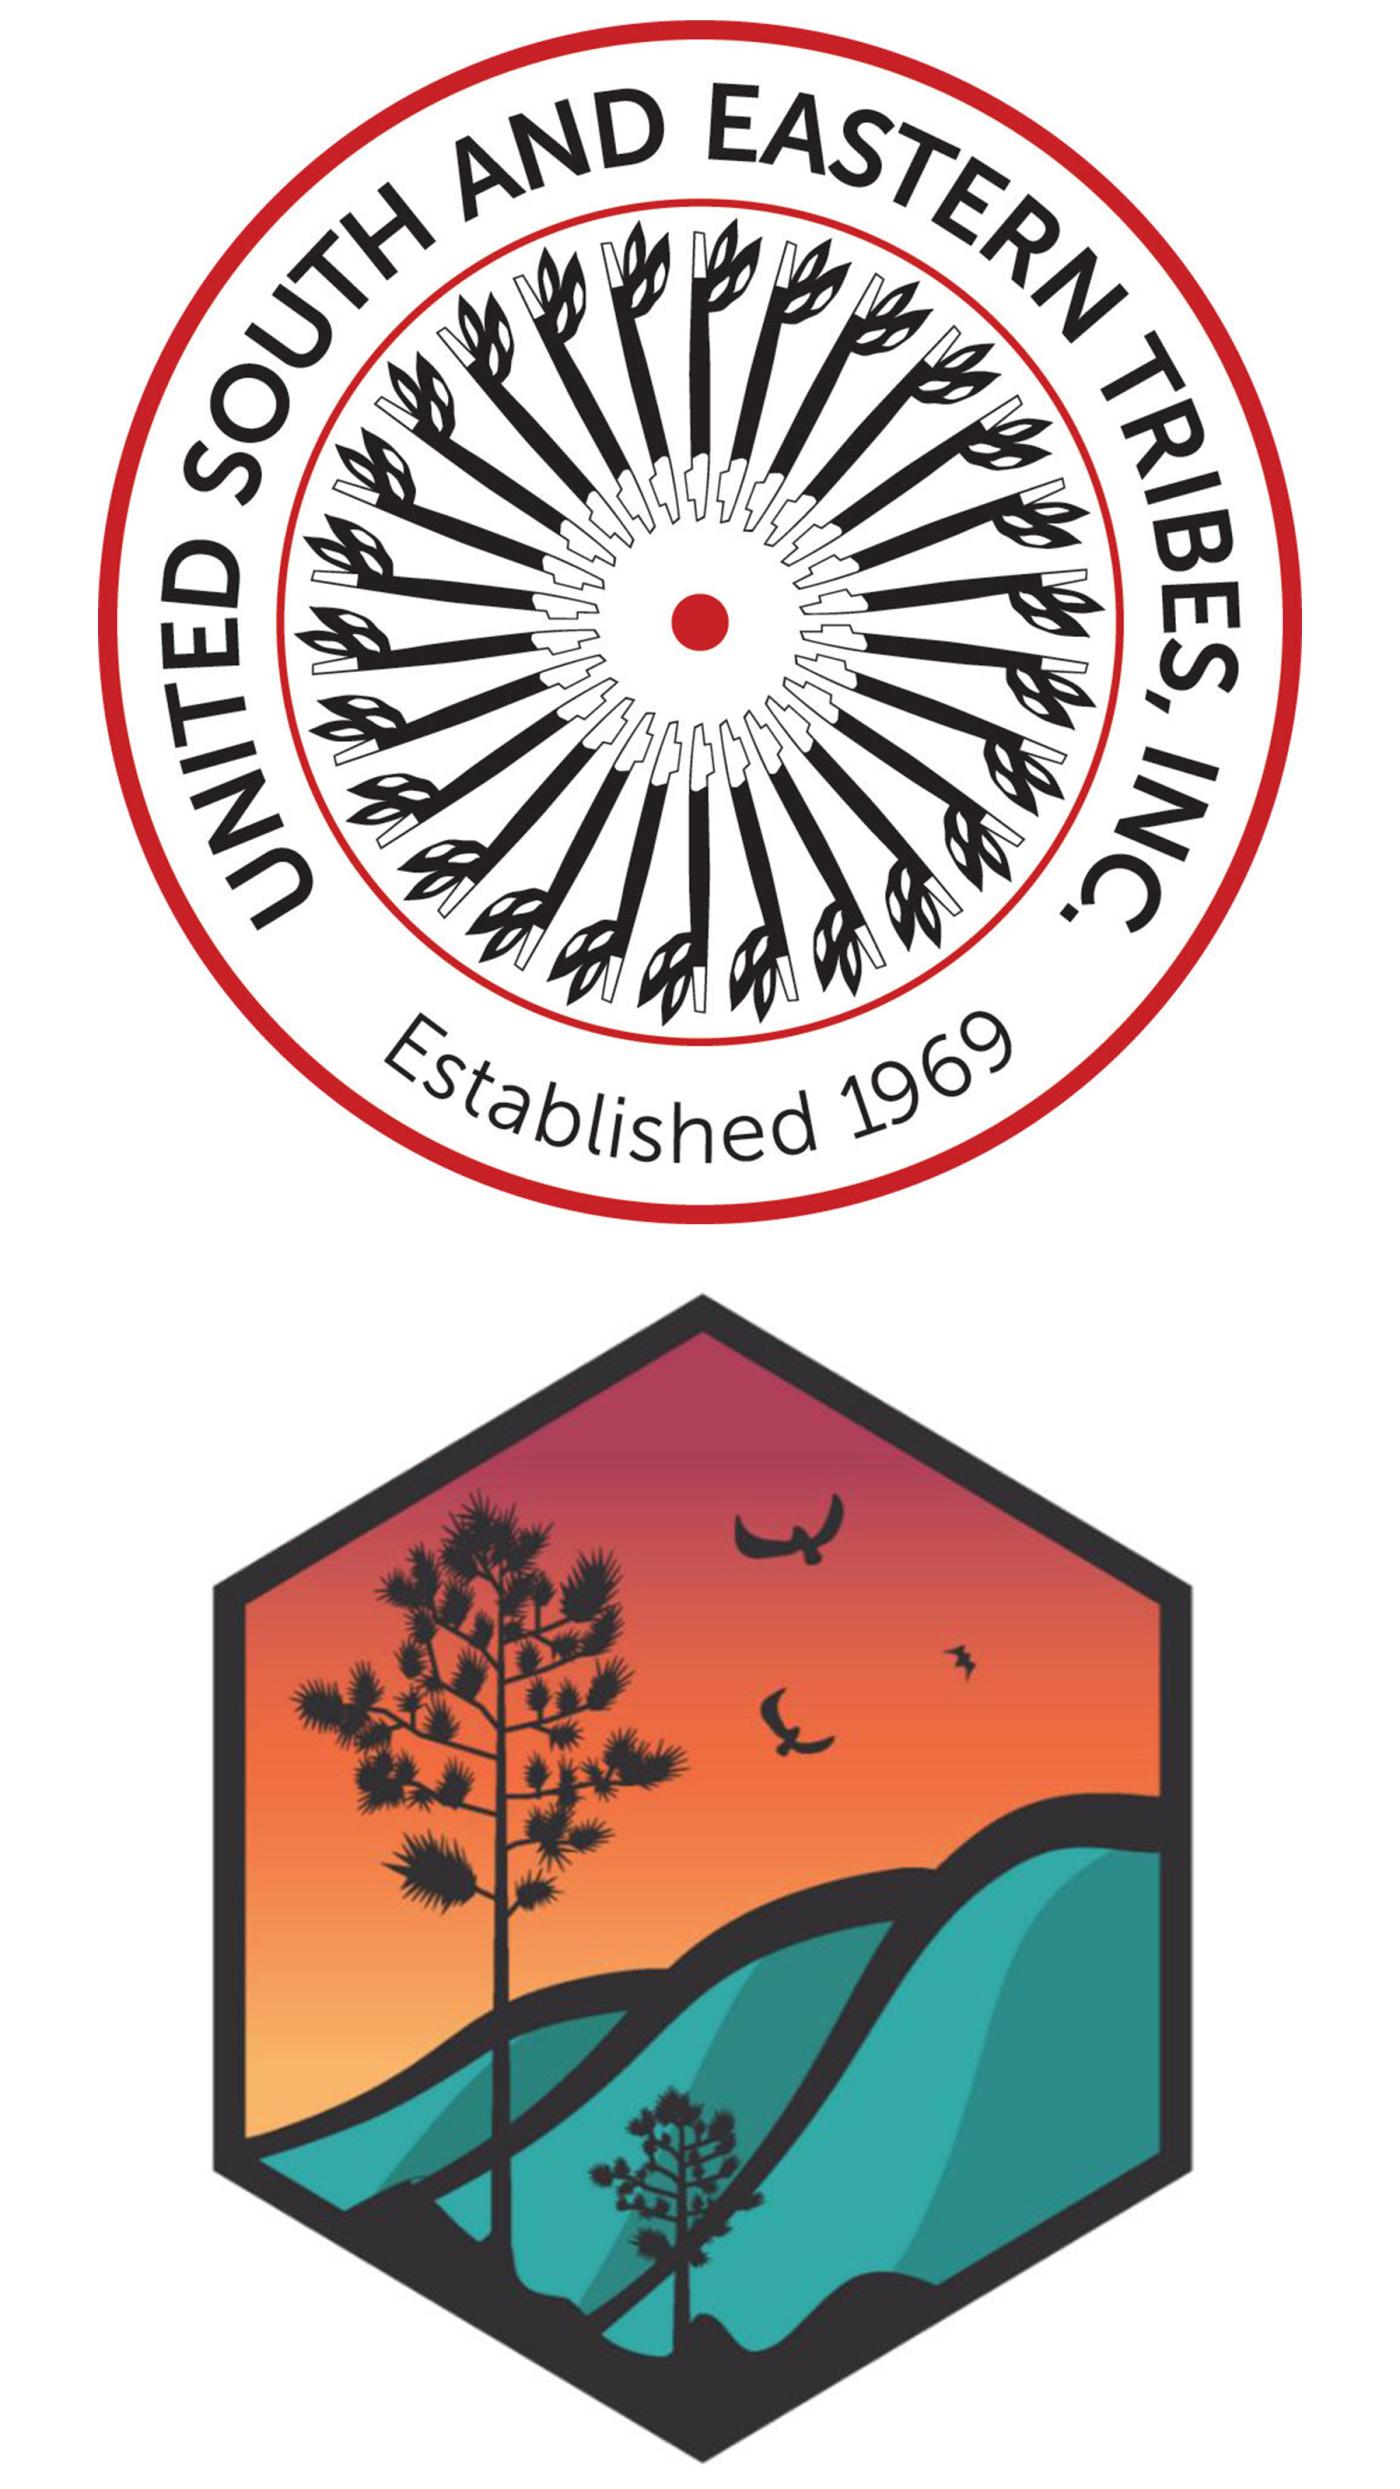 Two logos. In the 1st logo, in the outer circle of a two-ringed, red-bordered circle, texts read “United South and Eastern Tribes, Inc” and “Established in 1969”. In the inner circle, 27 black peace pipes arranged in a circle point inwards to a red silhouette of a leafy tree with spreading roots. In the 2nd hexagonal logo, two longleaf pine trees rise in front of three turquoise-colored sloping hills, while three birds are in flight on the upper left in a gradated red-tinged sky that evokes sunset.